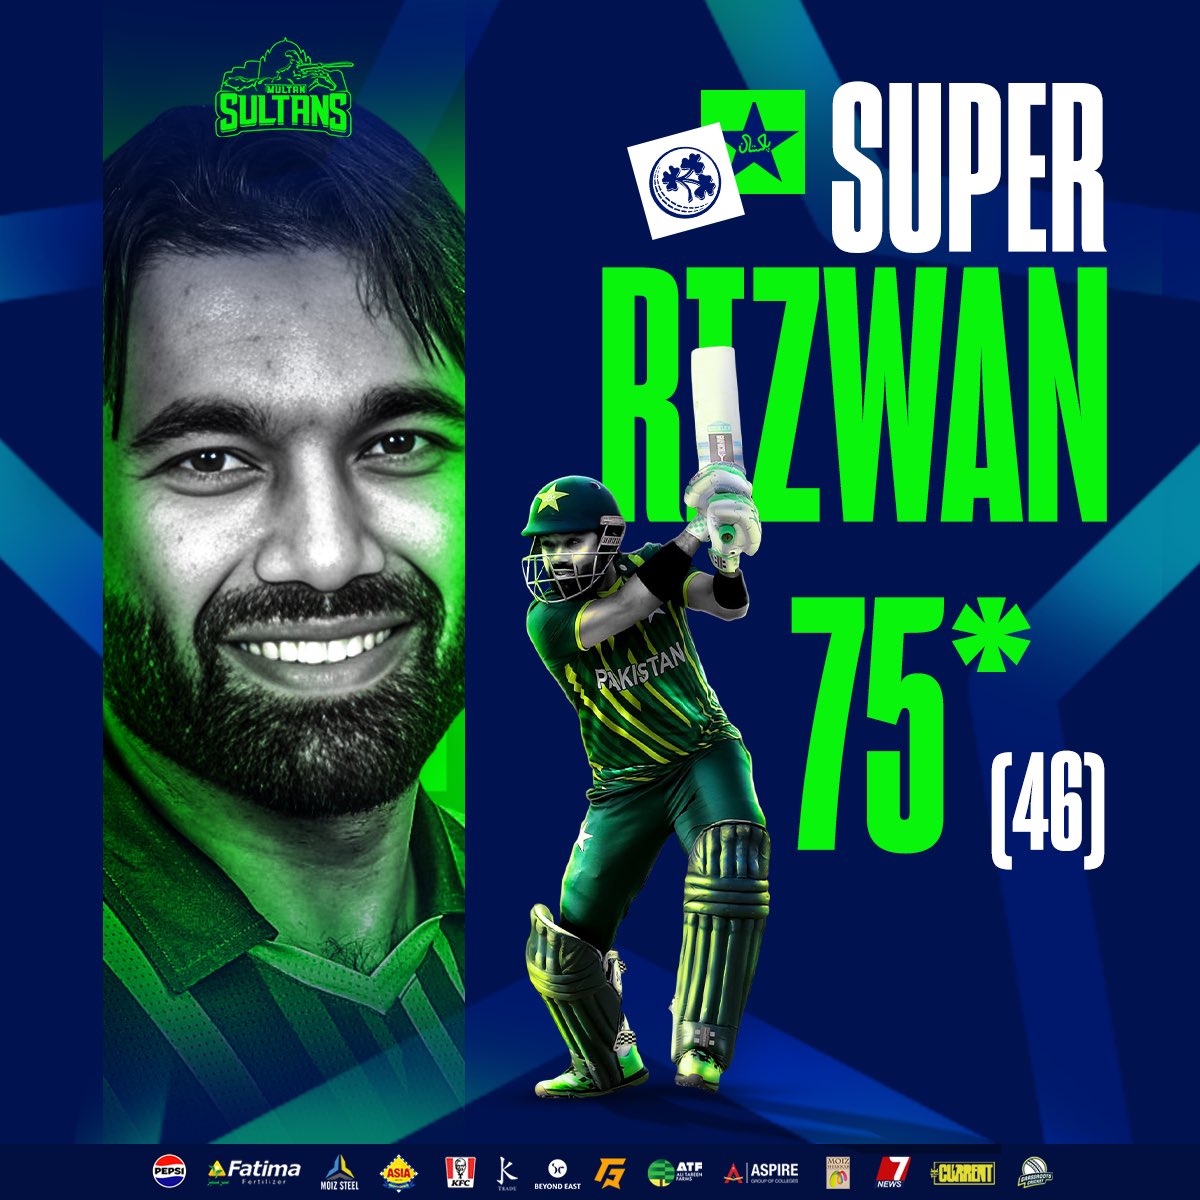 𝗦𝗨𝗣𝗘𝗥-𝗪𝗔𝗡 🦸‍♂️ 

Top knock by our top man! 🫡

#SultanSupremacy | #IREvPAK